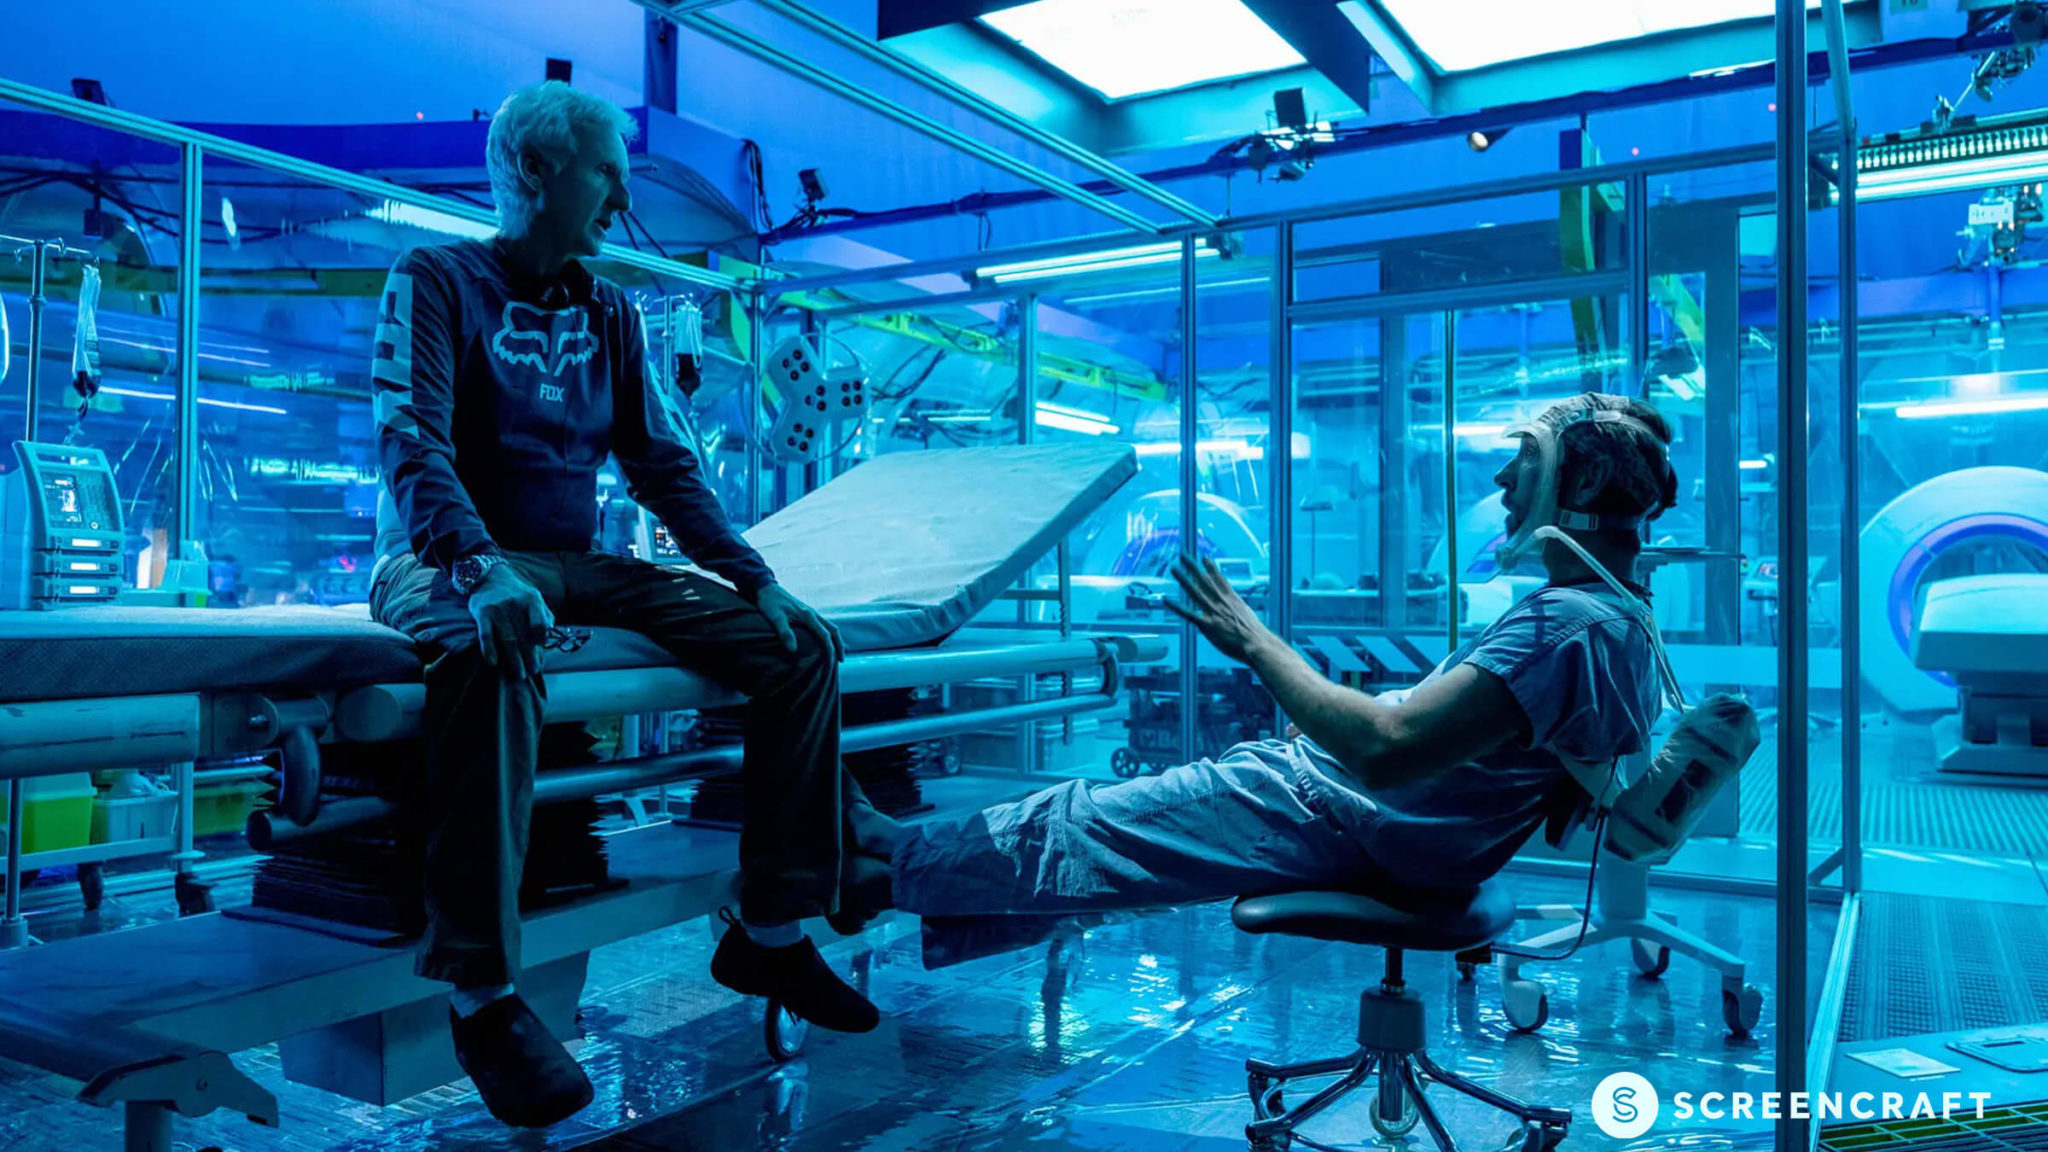 Avatar 2': James Cameron and team all set to resume production in